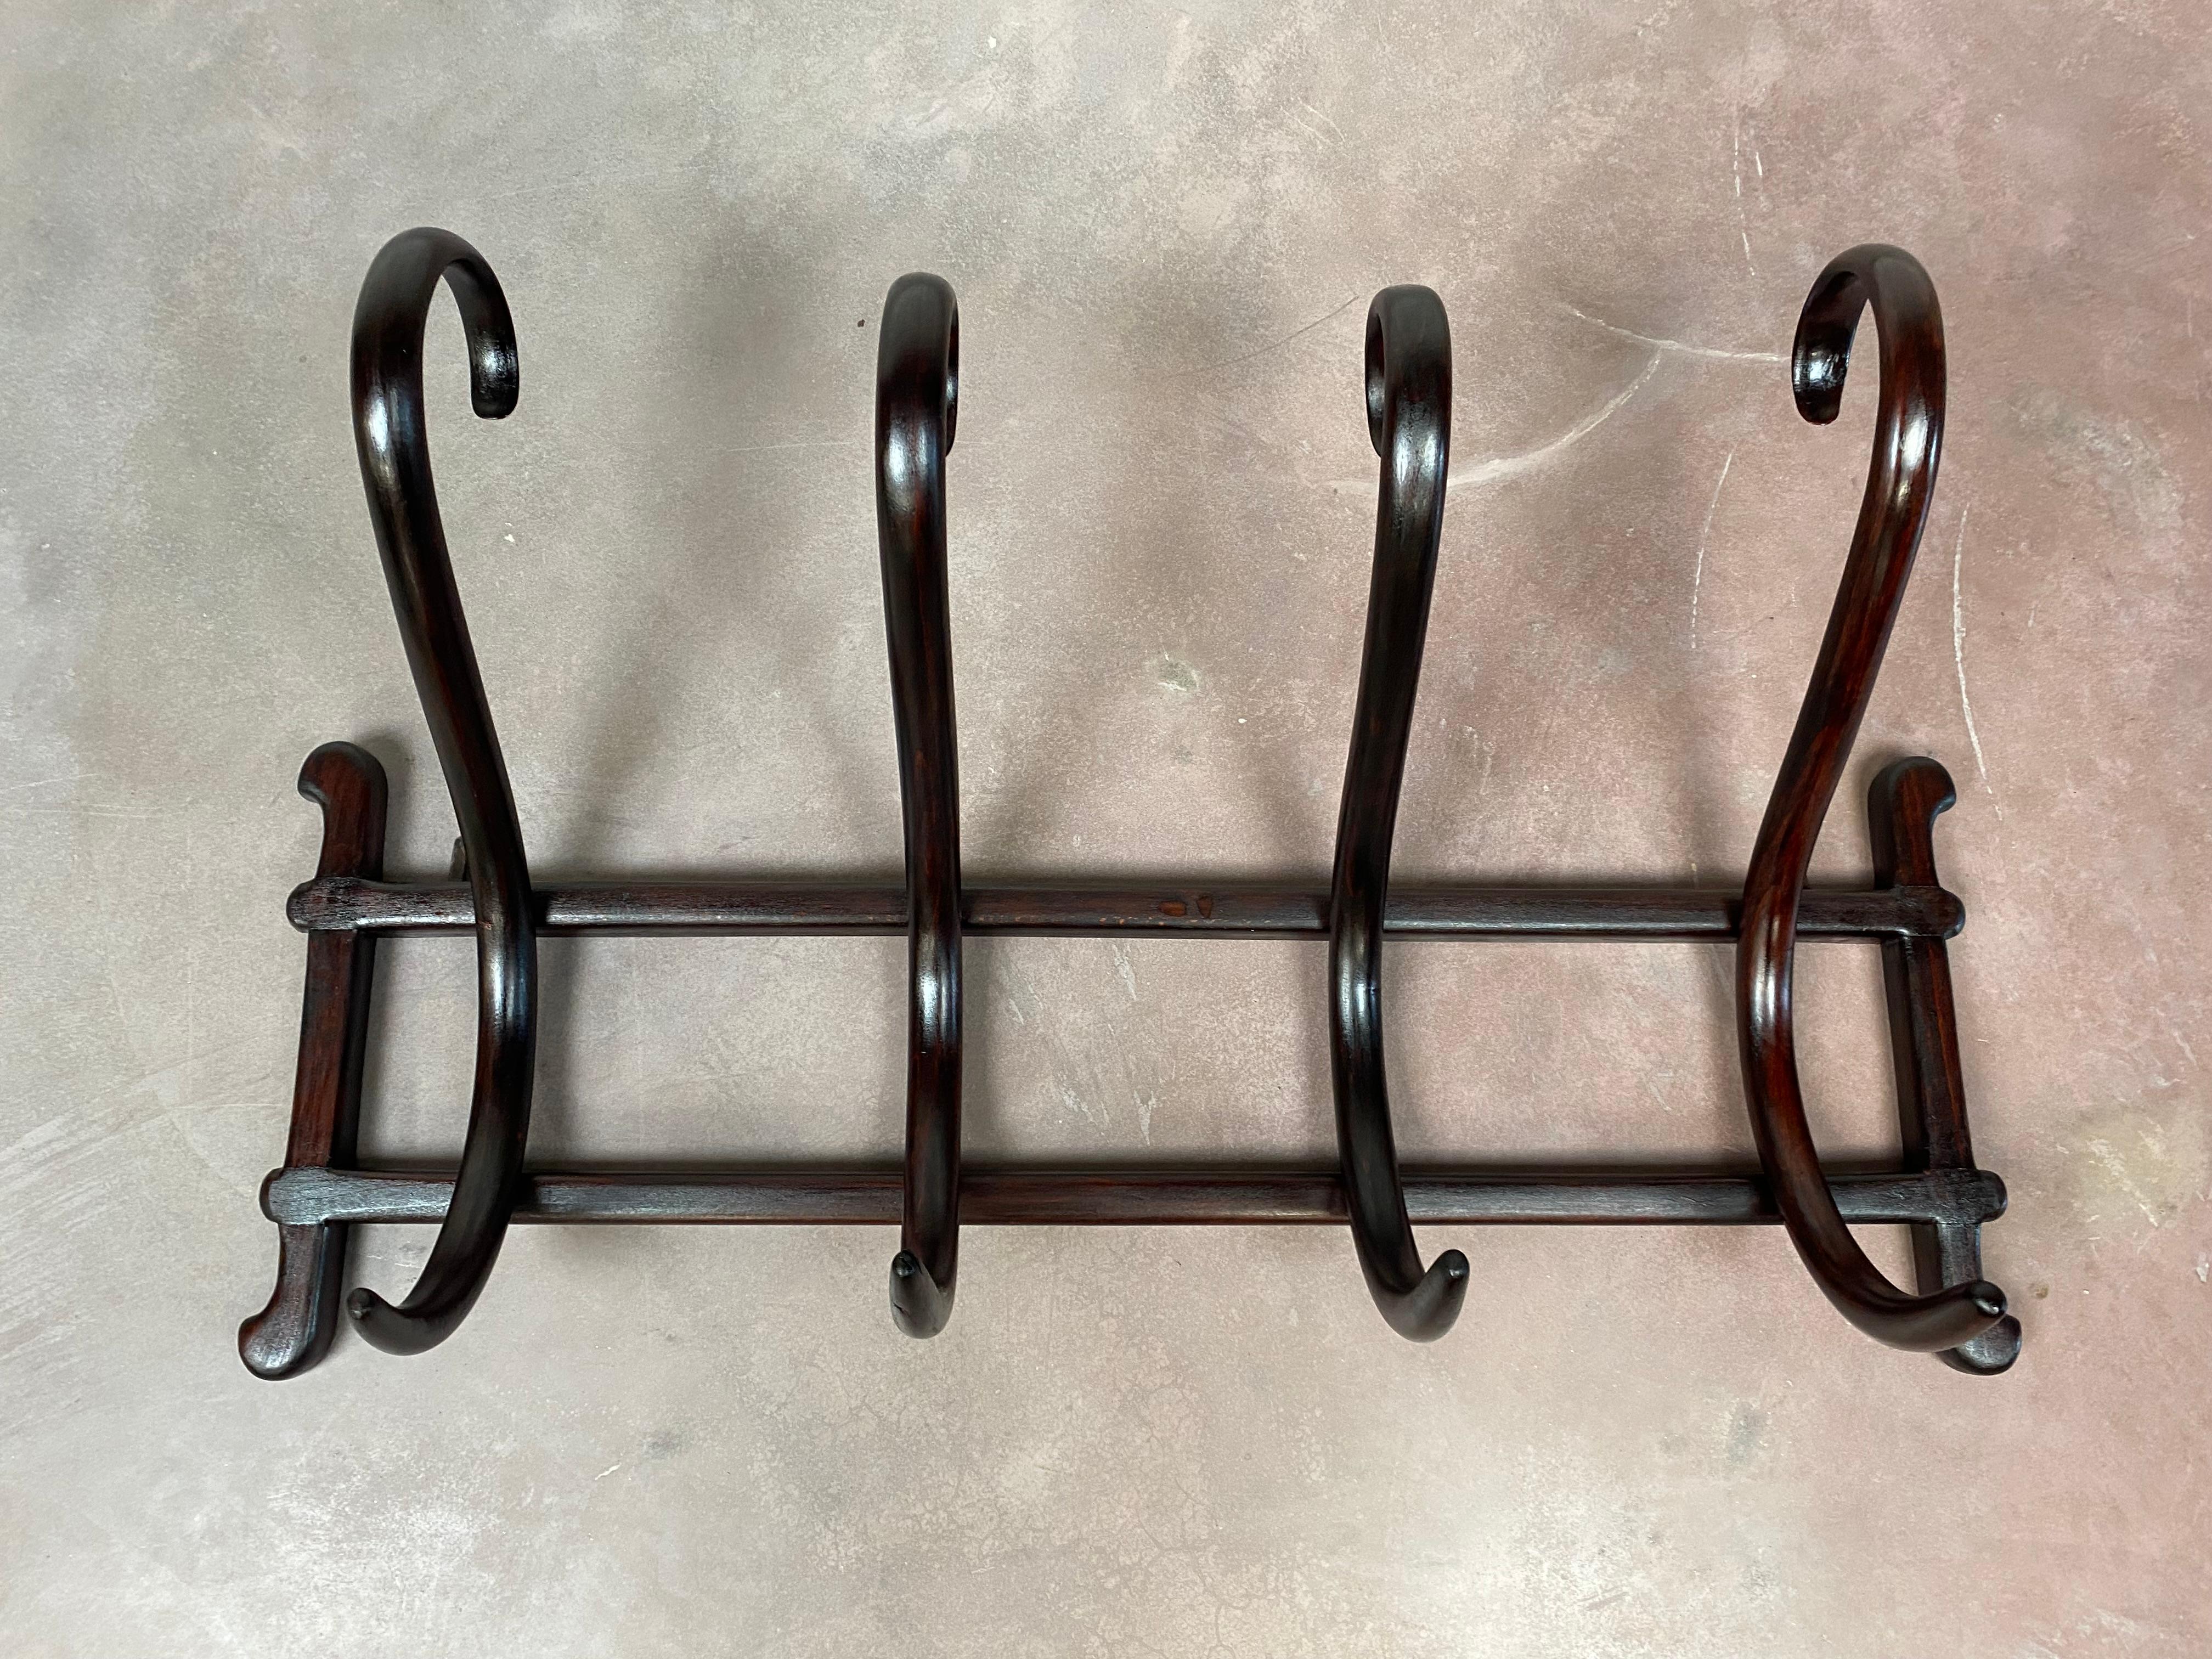 Secession wall hanger no.1 by Thonet professionally stained and repolished.